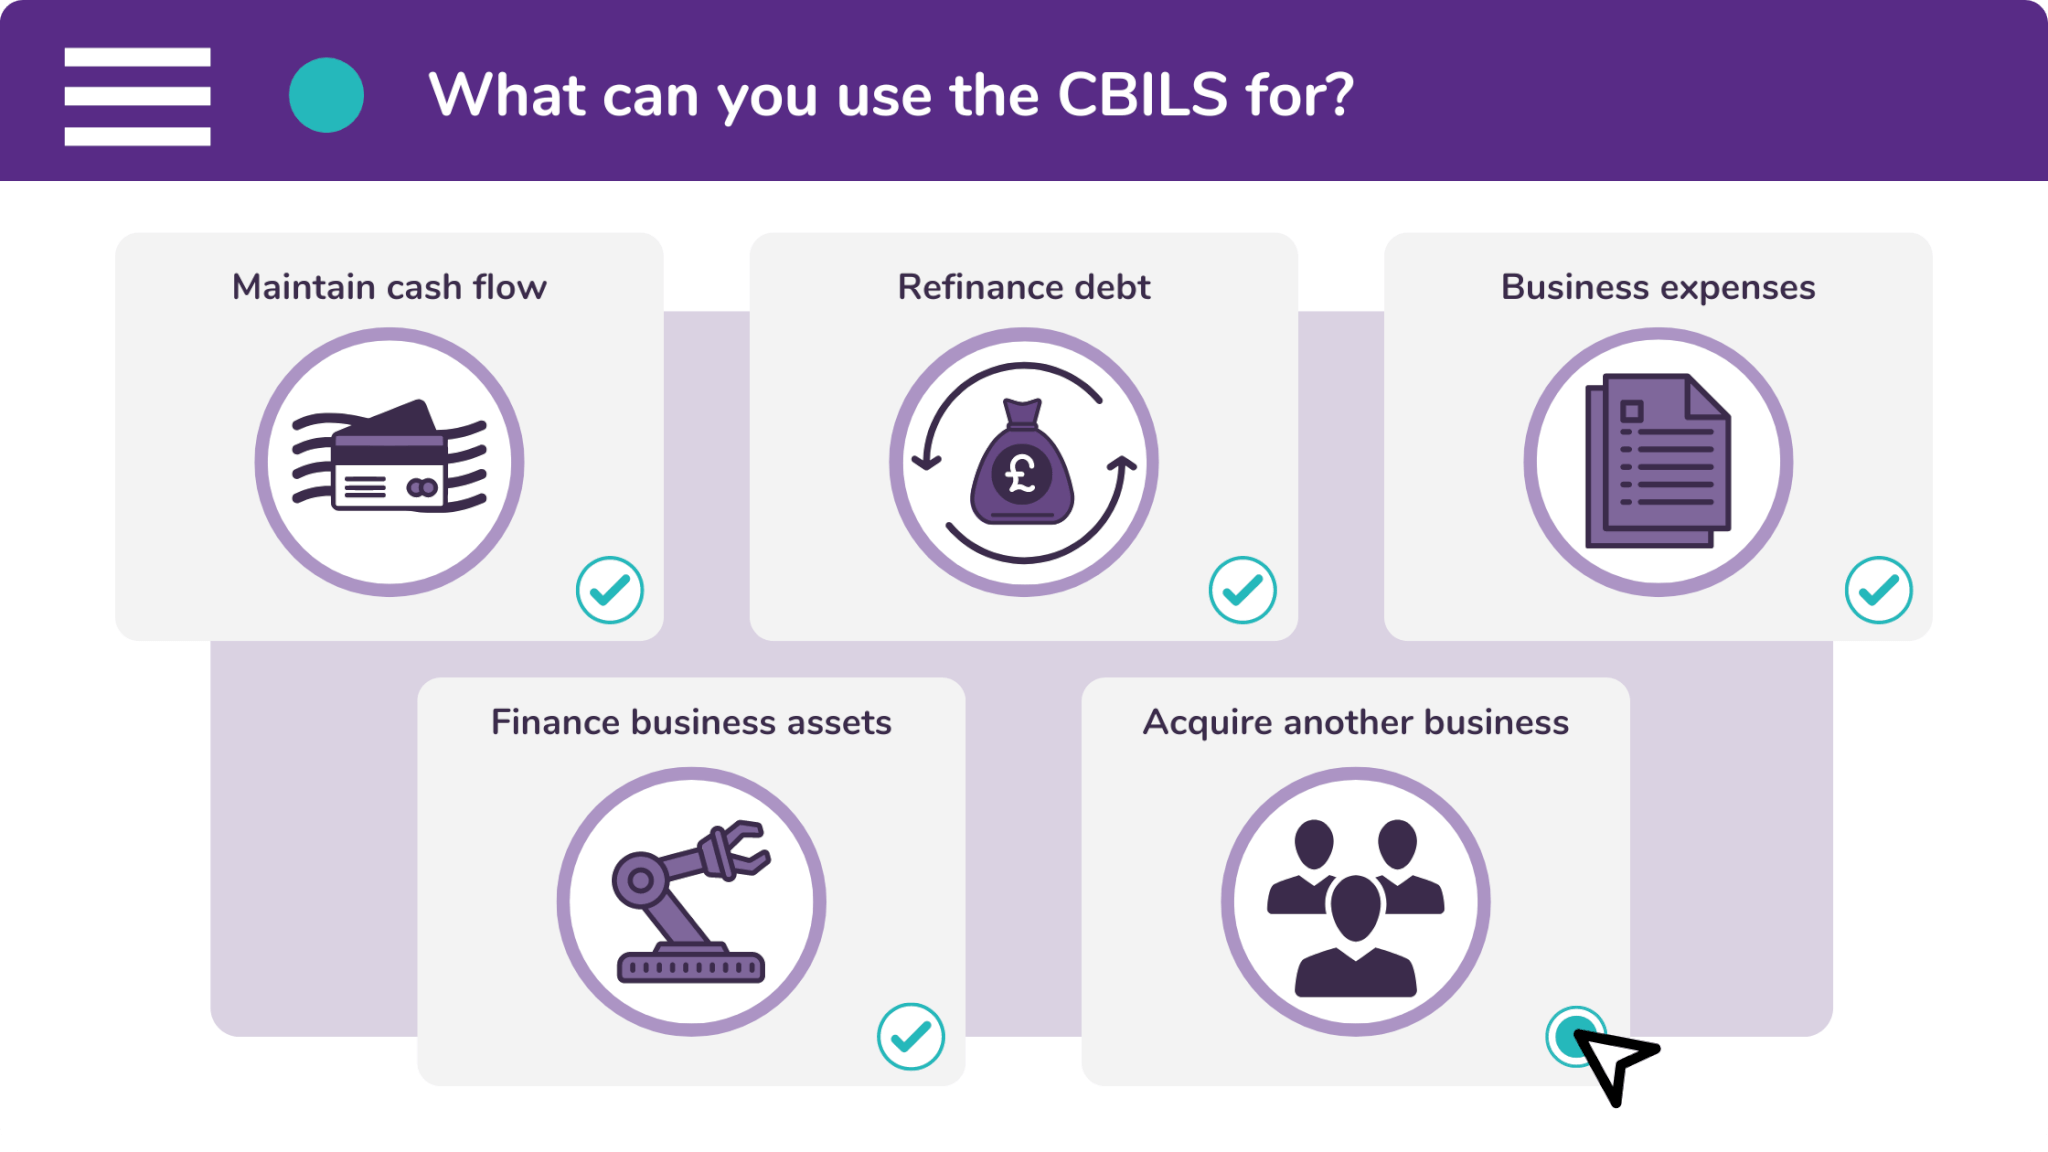 You can use the CBILS for any business purpose, but we recommend using it for five things.